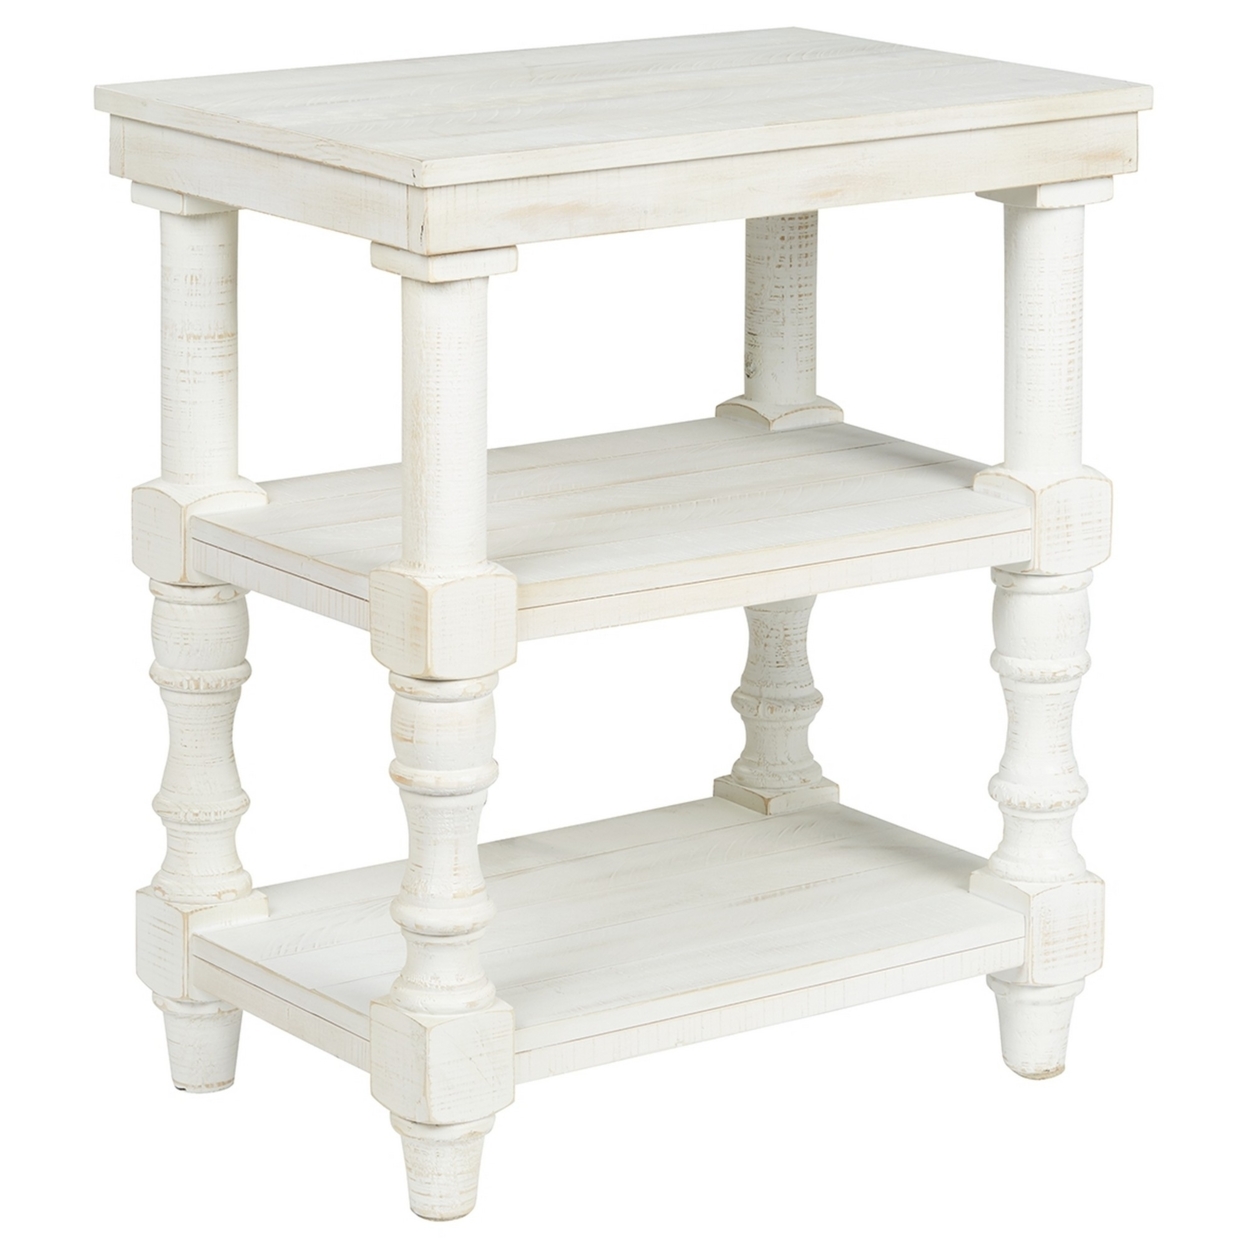 Wooden Accent Table With 2 Shelves And 2 USB Ports, Antique White- Saltoro Sherpi